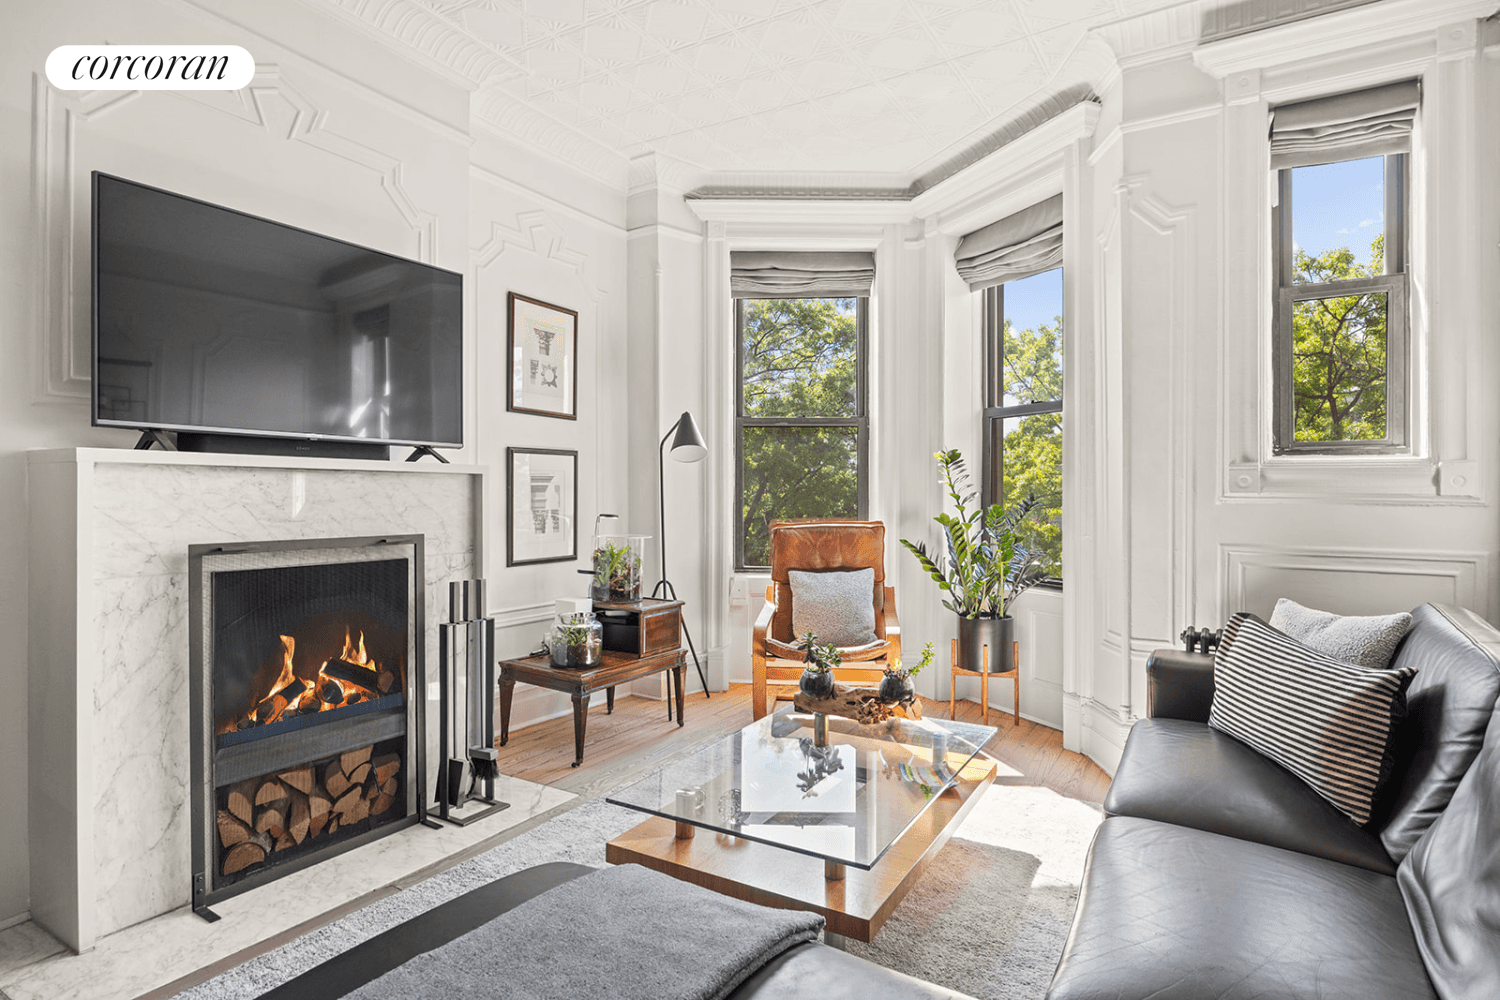 In the heart of Park Slope, ONE BLOCK from Prospect Park, with its own ROOF DECK, a working WOODBURNING FIREPLACE and a renovated kitchen and bath, this airy two bedroom, ...